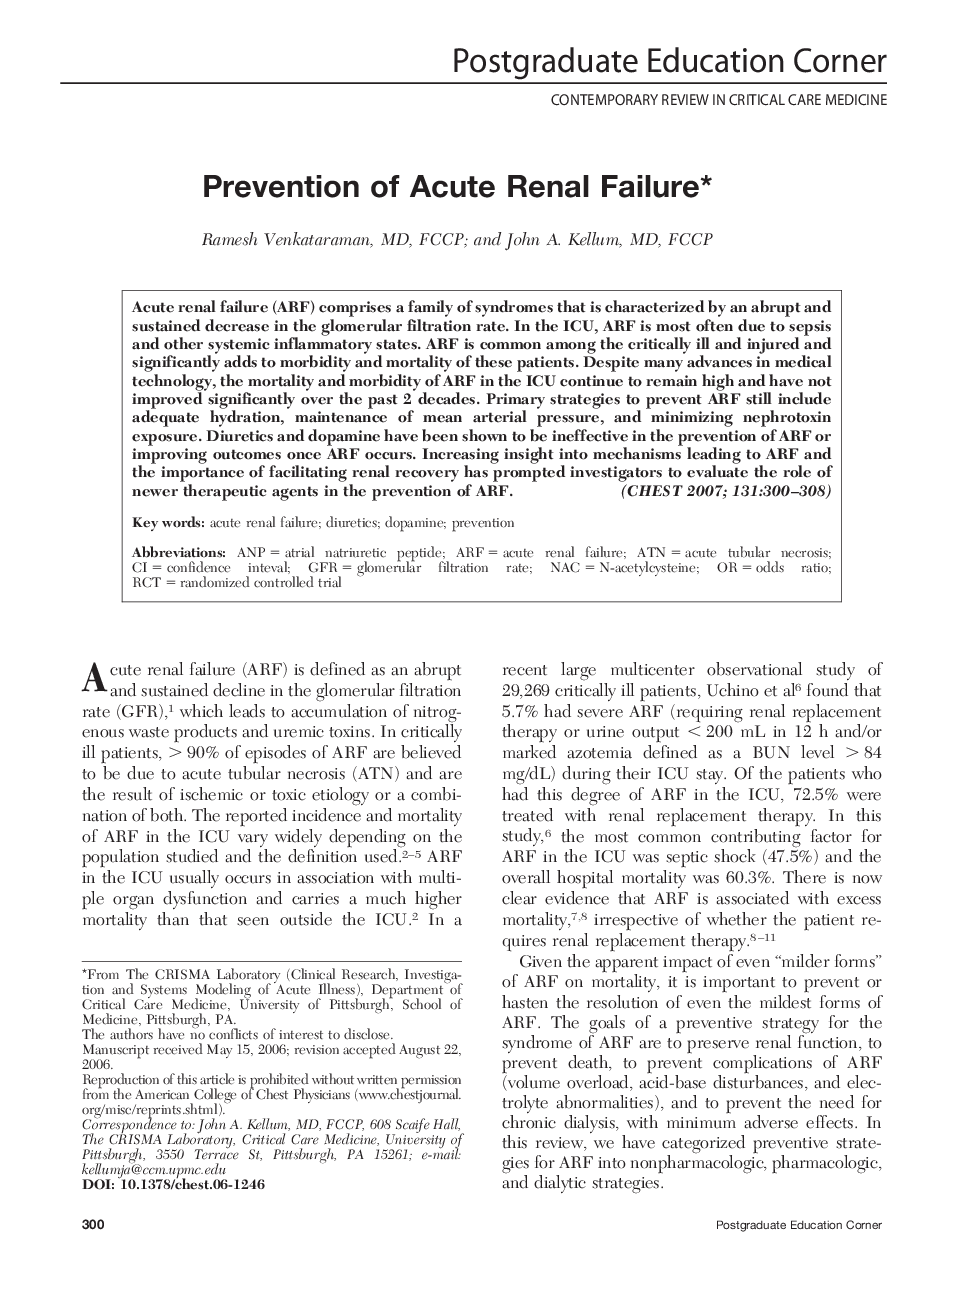 Prevention of Acute Renal Failure 